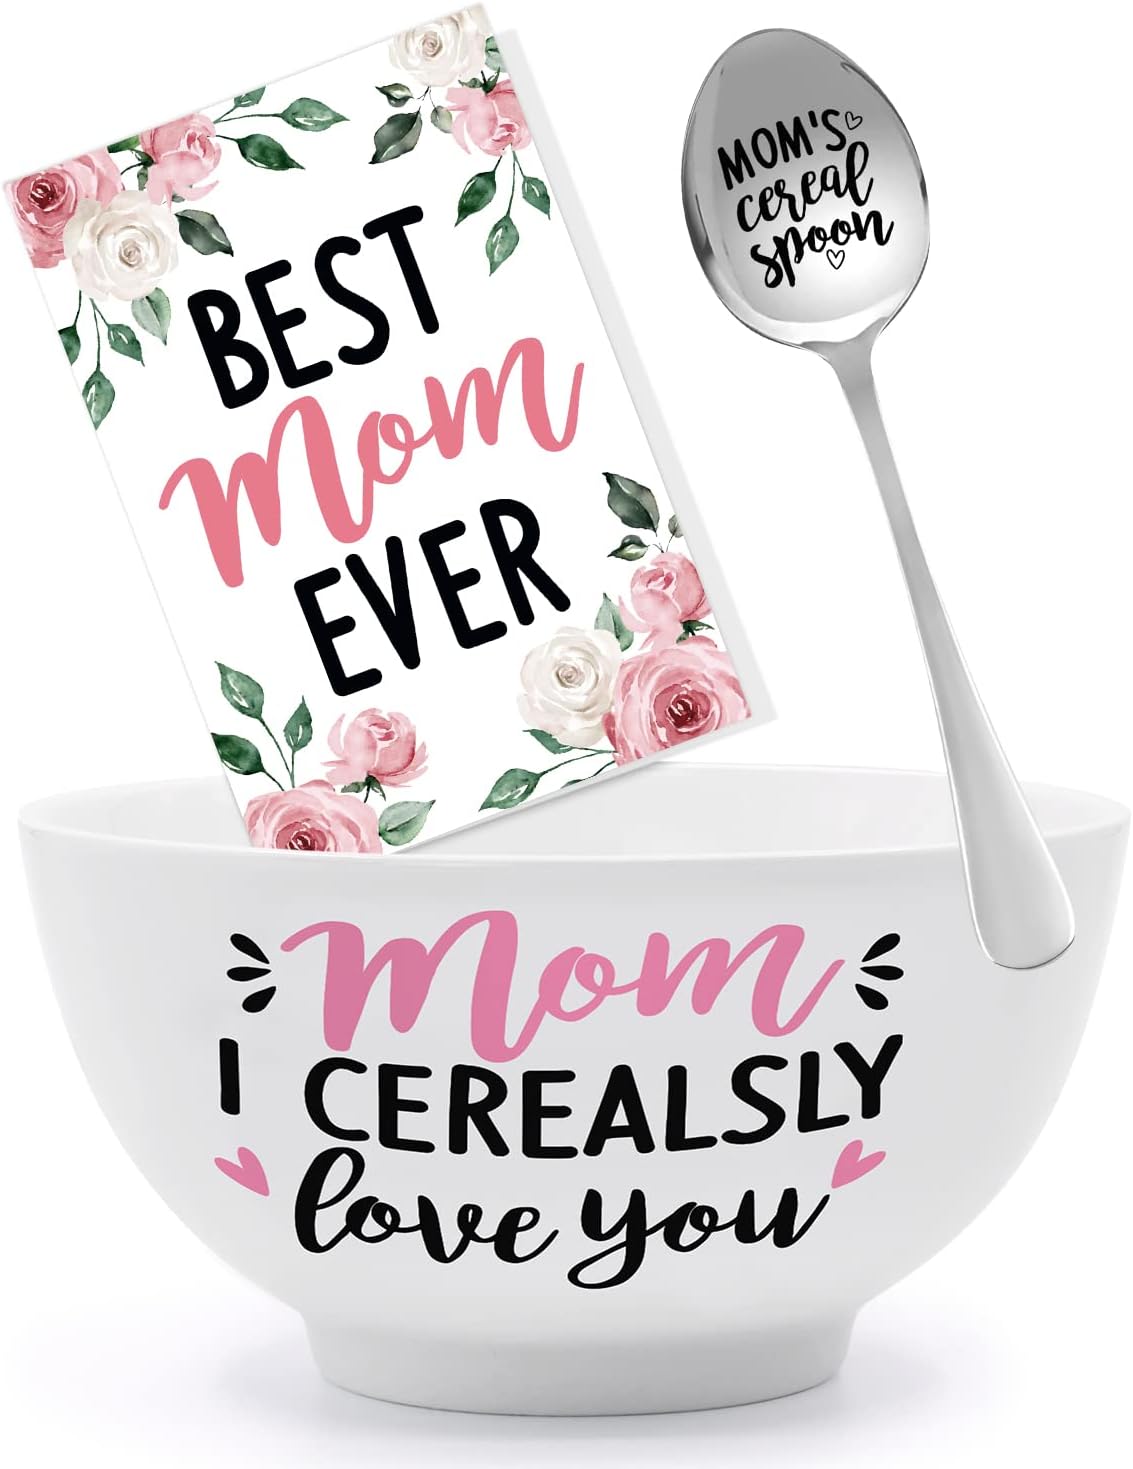 Mom's Cereal Bowl and Spoon Set with Best Mom Ever Gift Set of 3 | momhomedecor